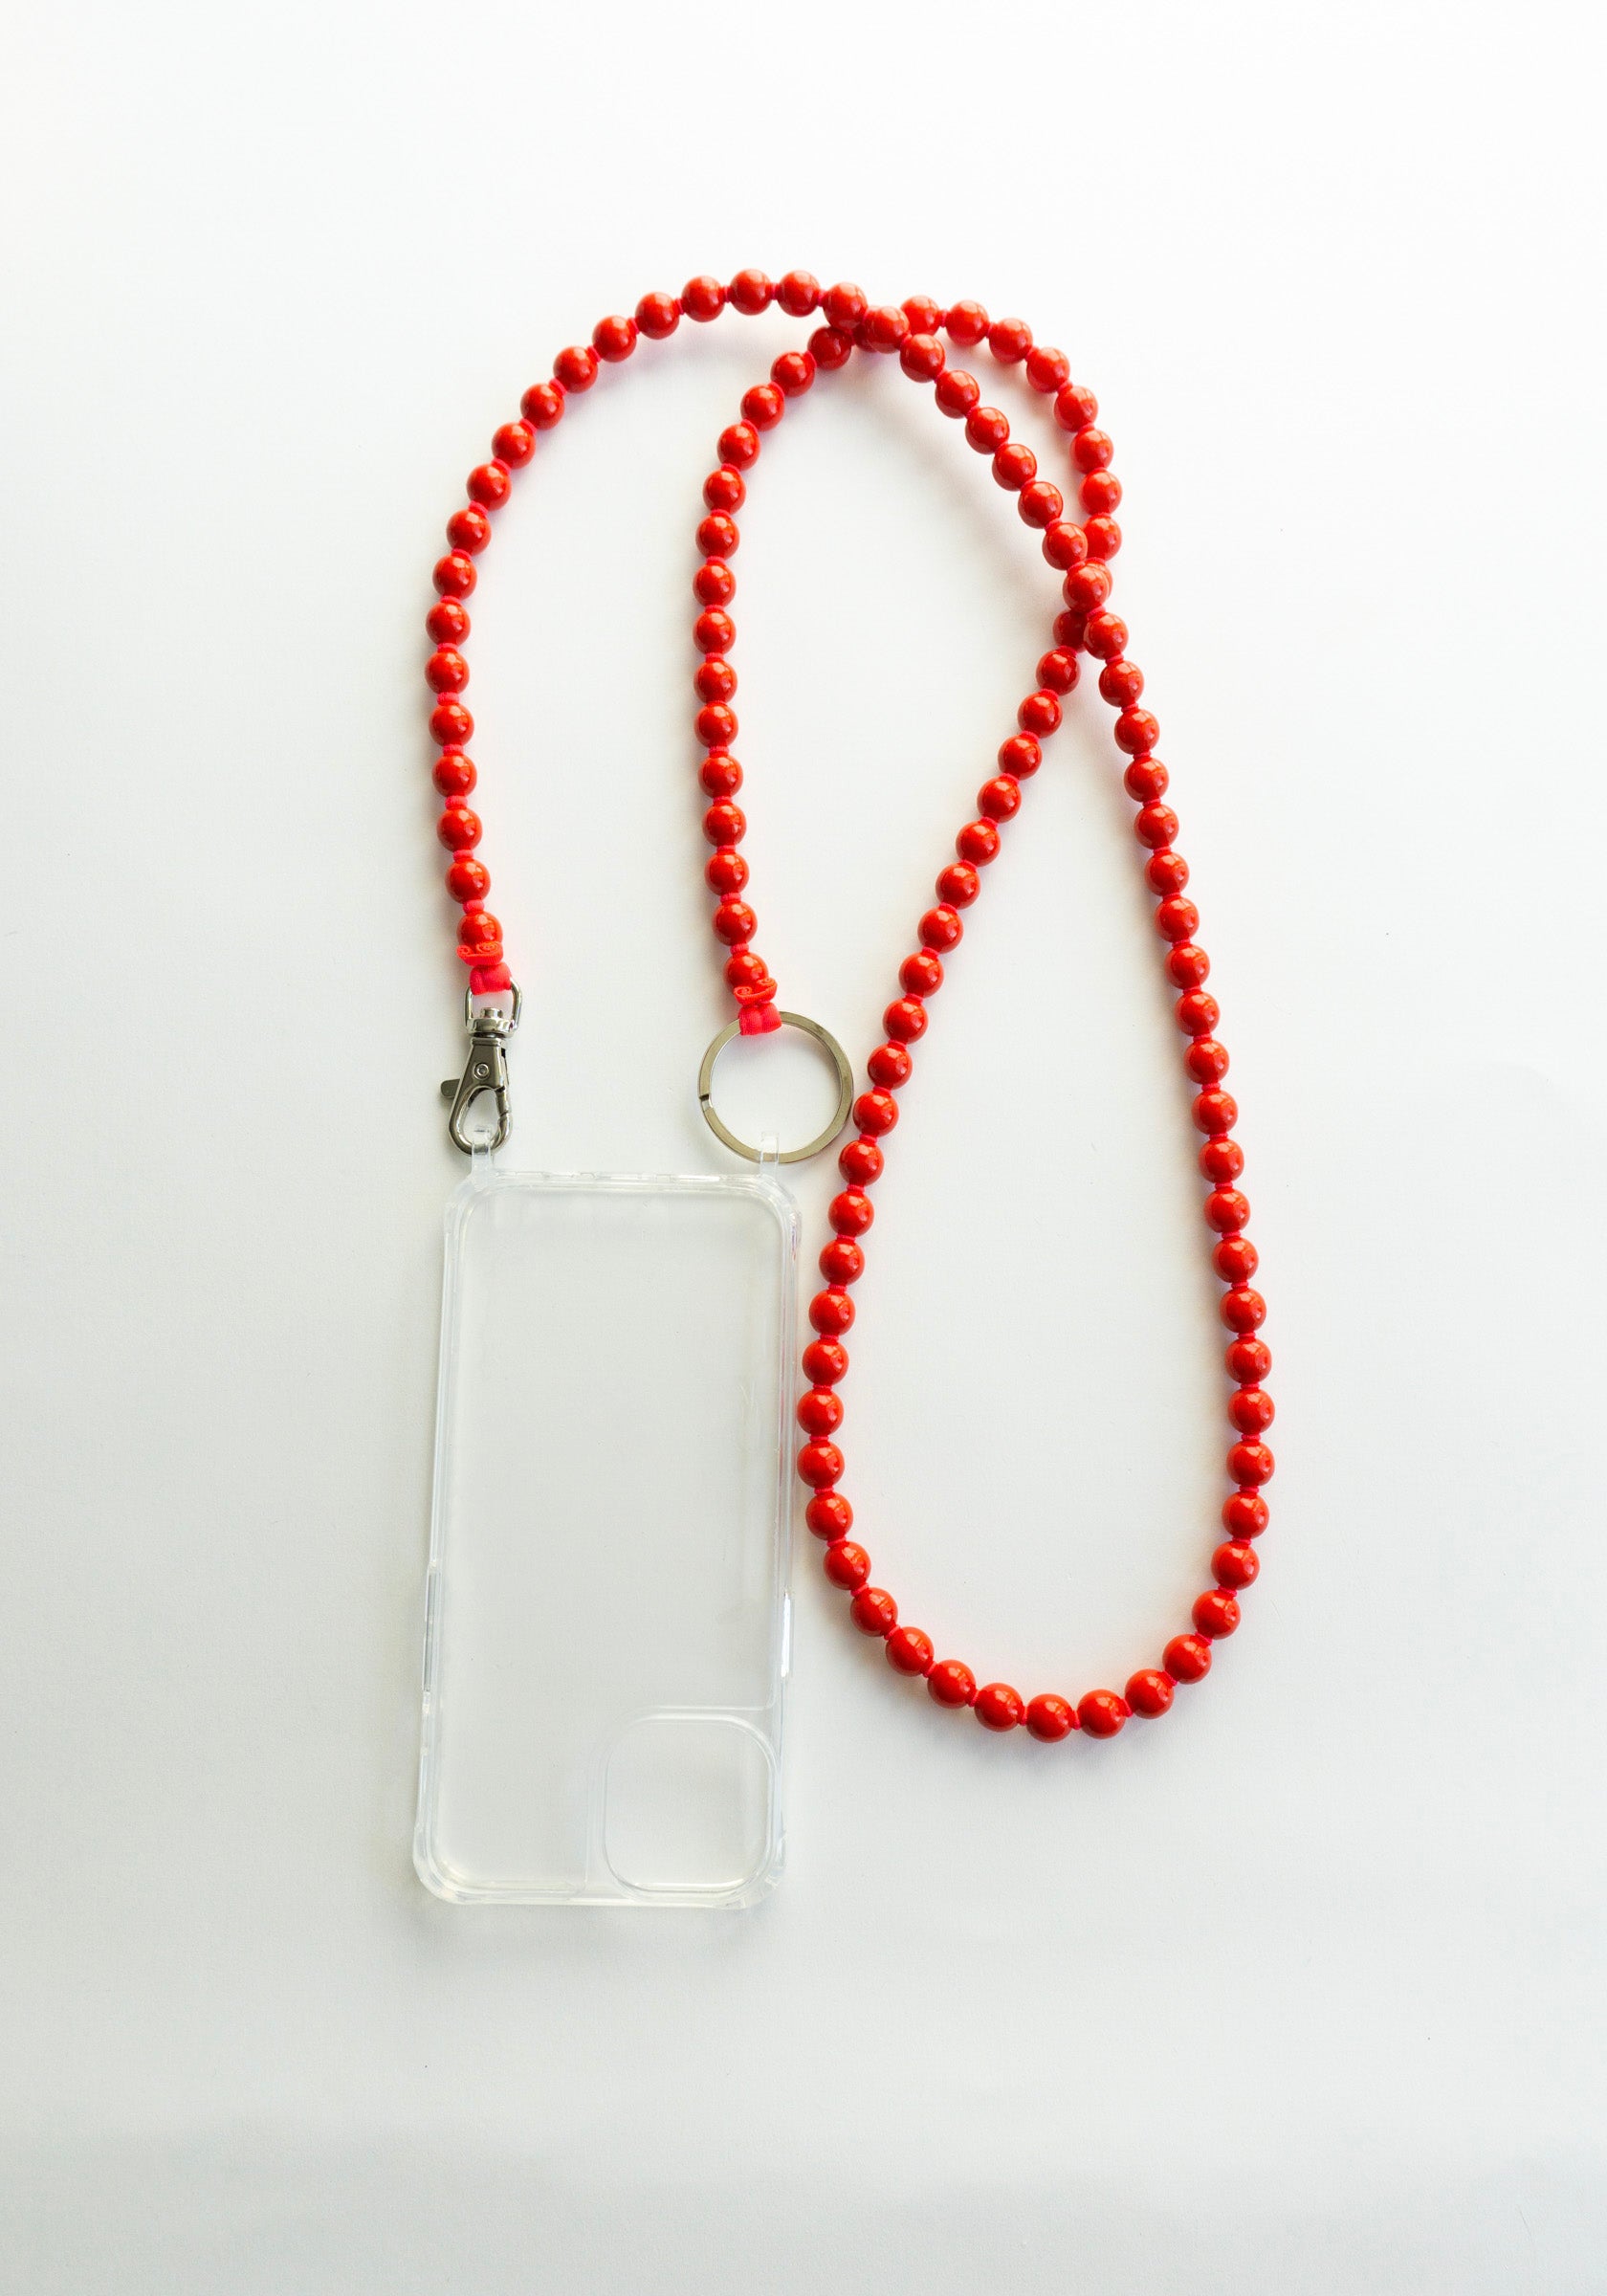 Ina Seifart Handykette iPhone Necklace in Multimix